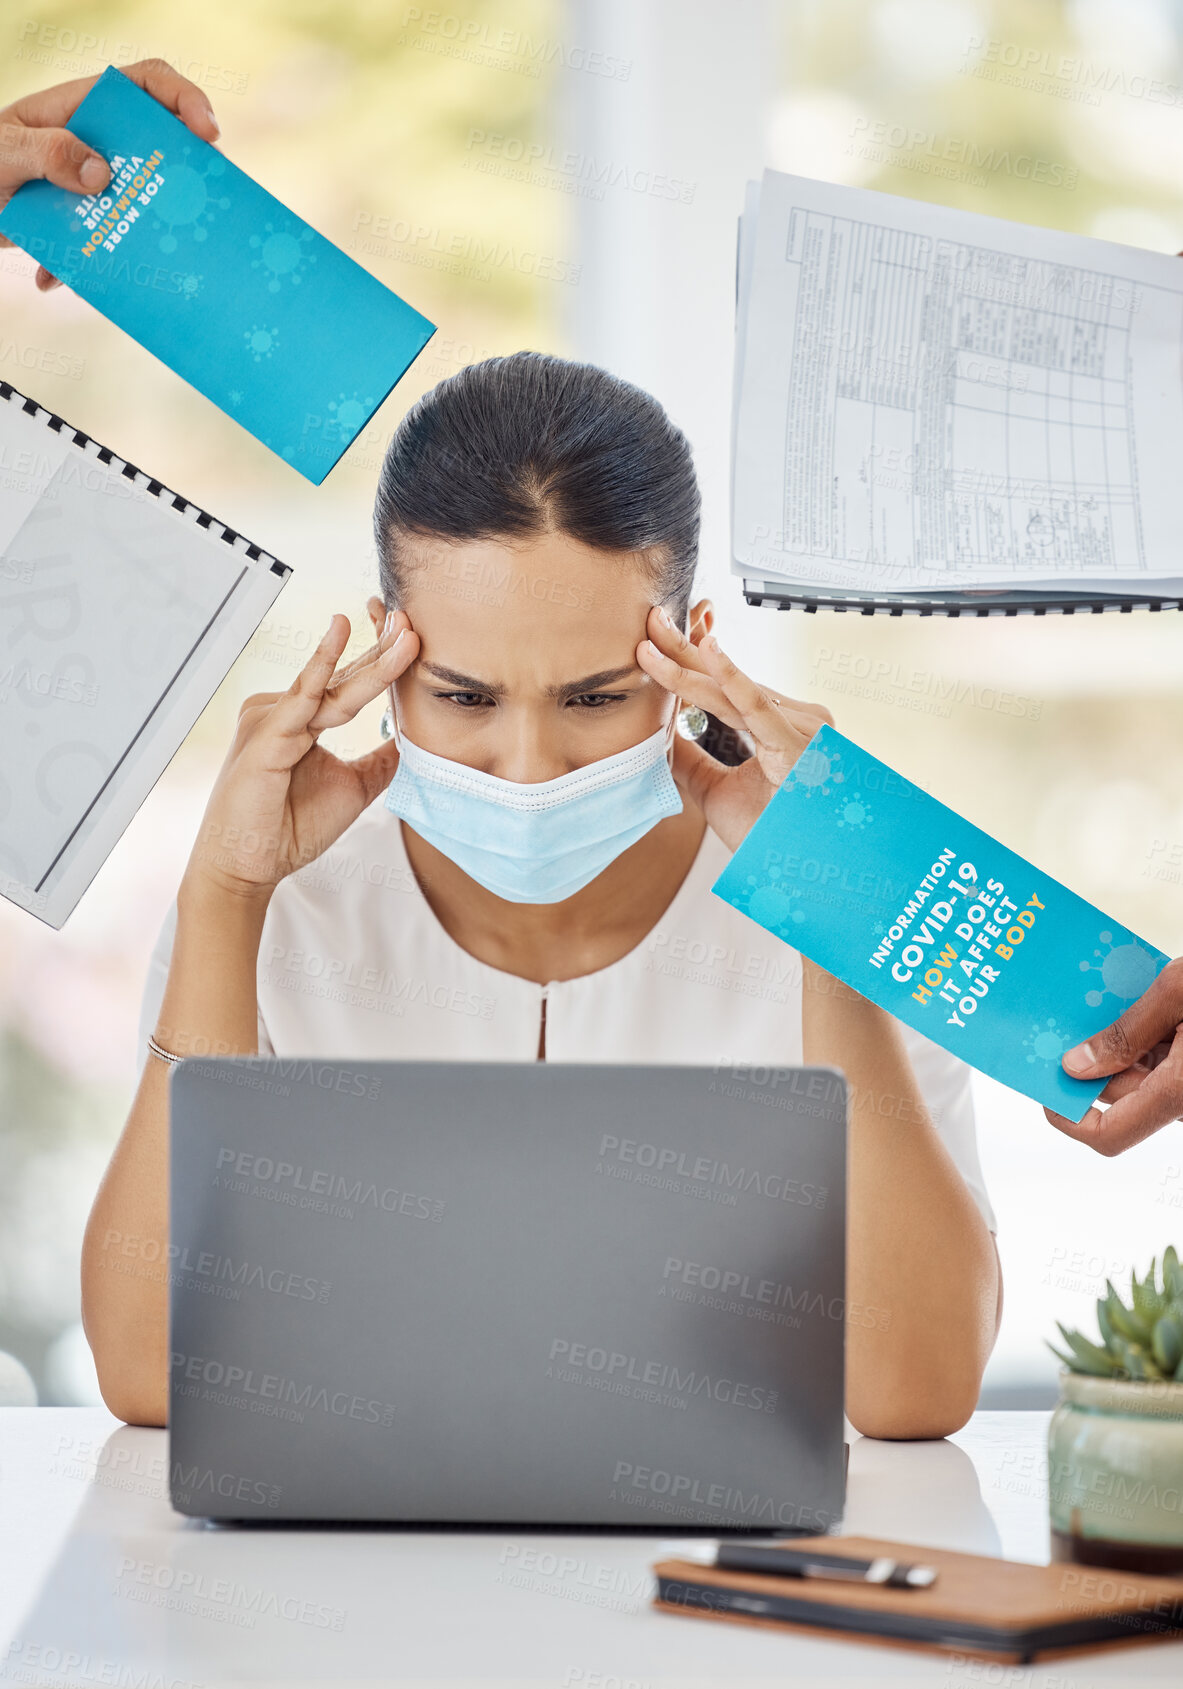 Buy stock photo Covid, tired or stress of woman at laptop overwhelmed with information in business peoples hands. Anxiety, mask and mental health concern of corporate employee with covid 19 fatigue at work.

